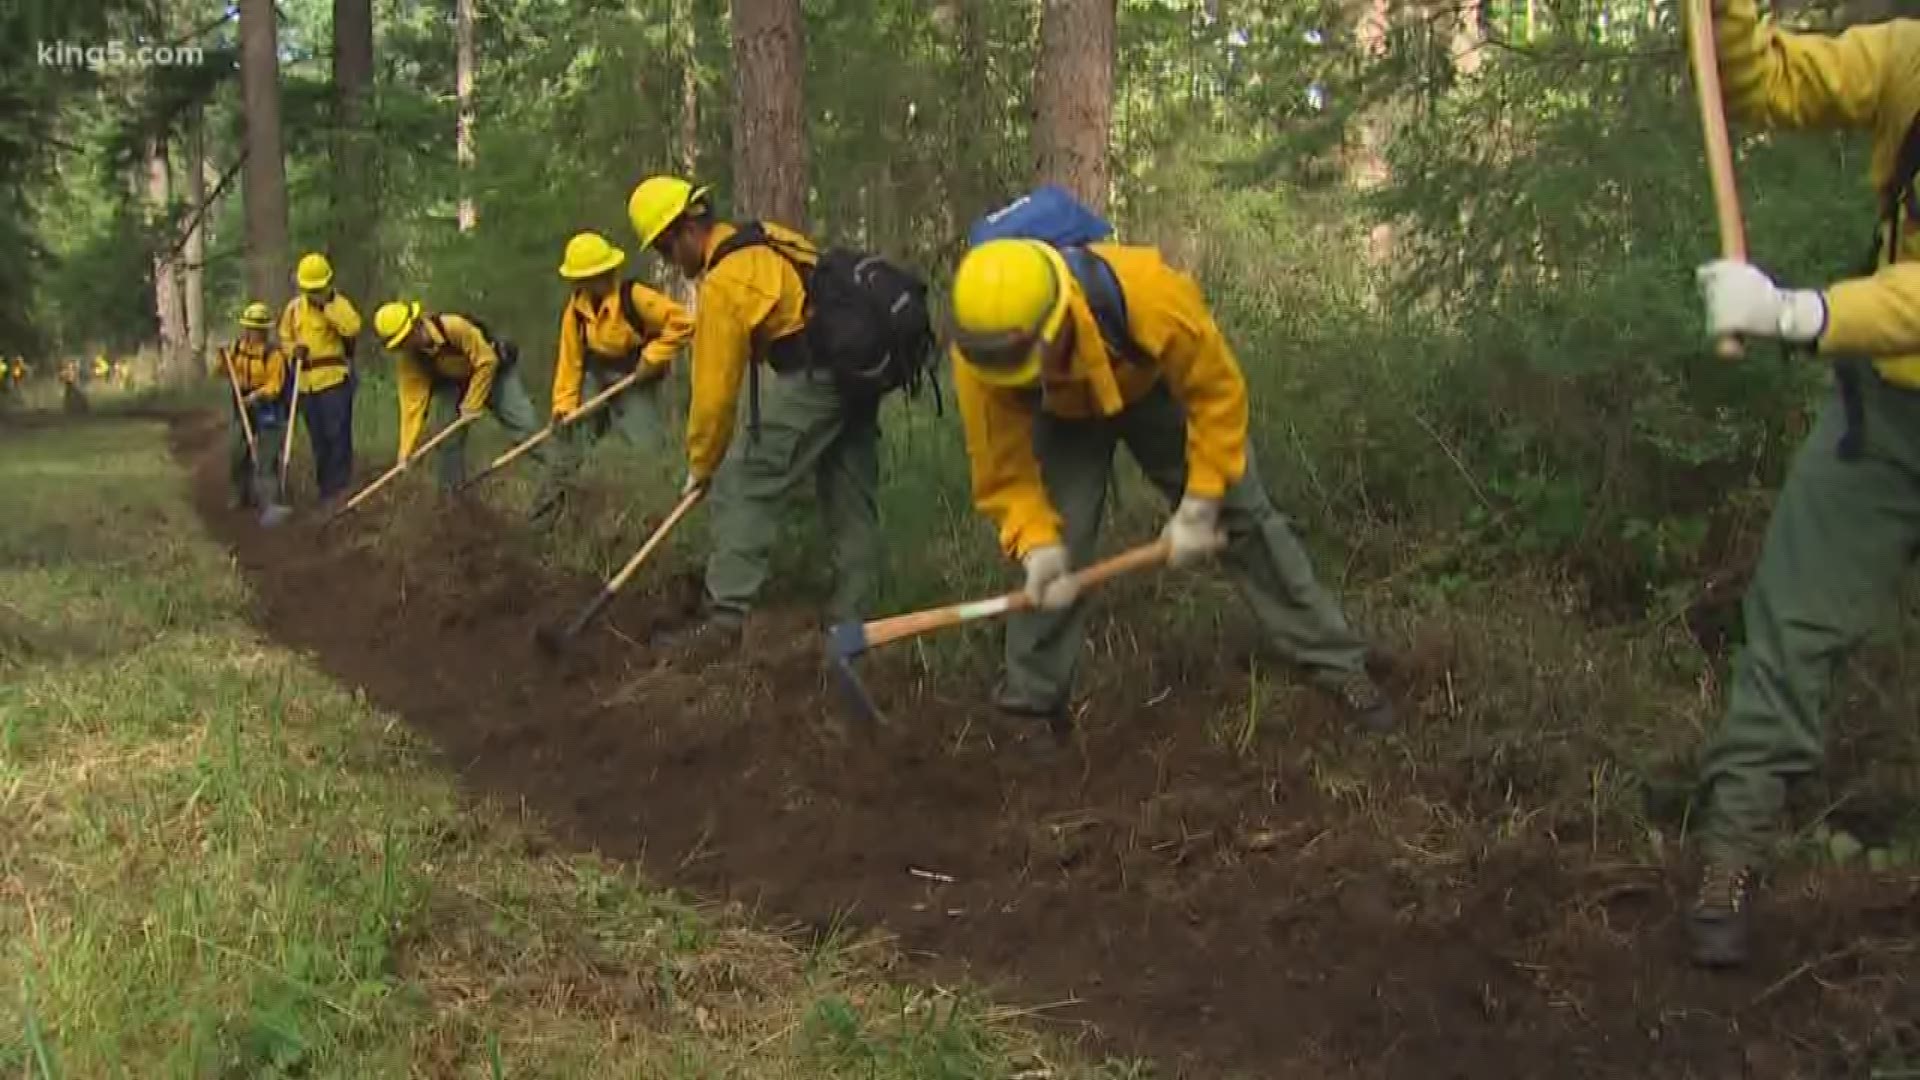 Firefighters and the National Guard are prepping for an anticipated heavy wildfire season